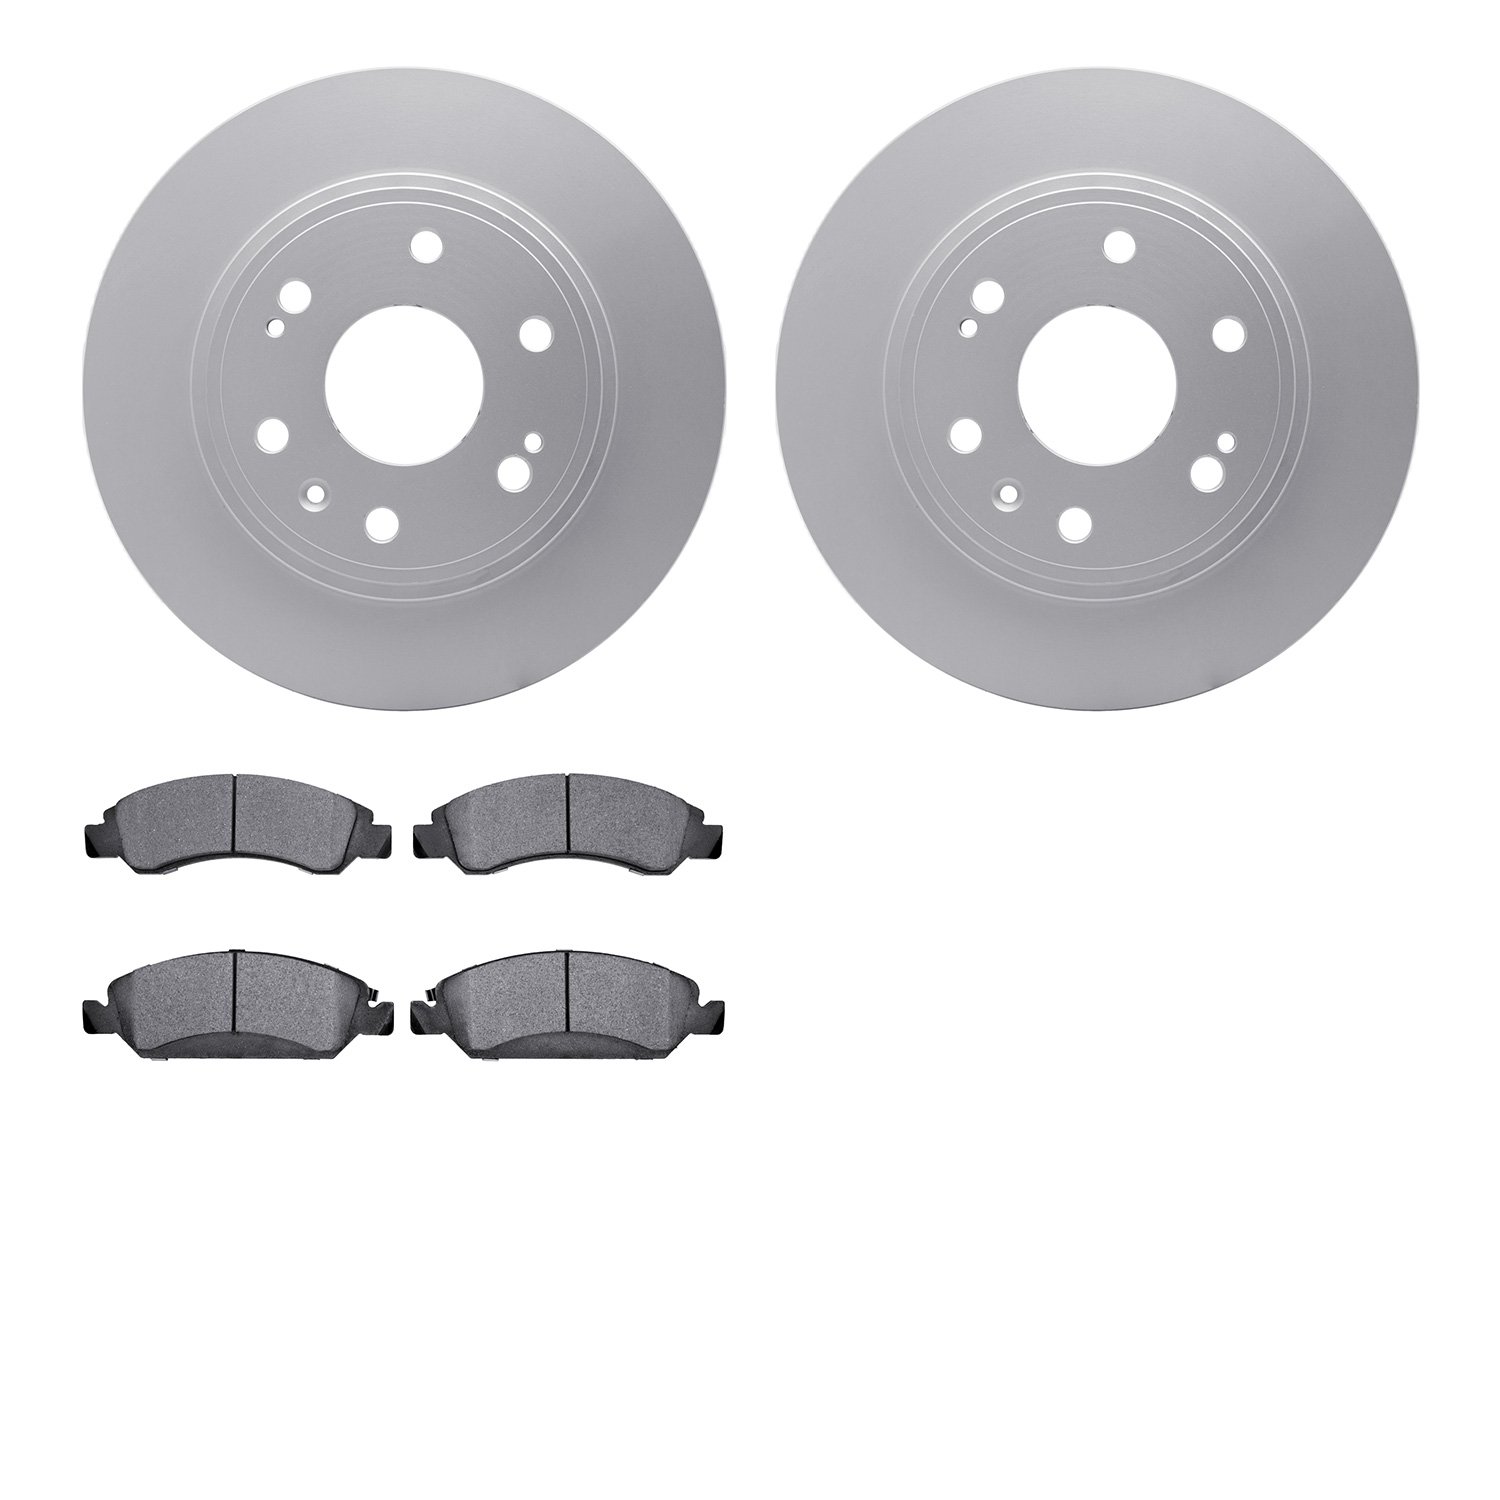 4402-48036 Geospec Brake Rotors with Ultimate-Duty Brake Pads Kit, 2009-2020 GM, Position: Front